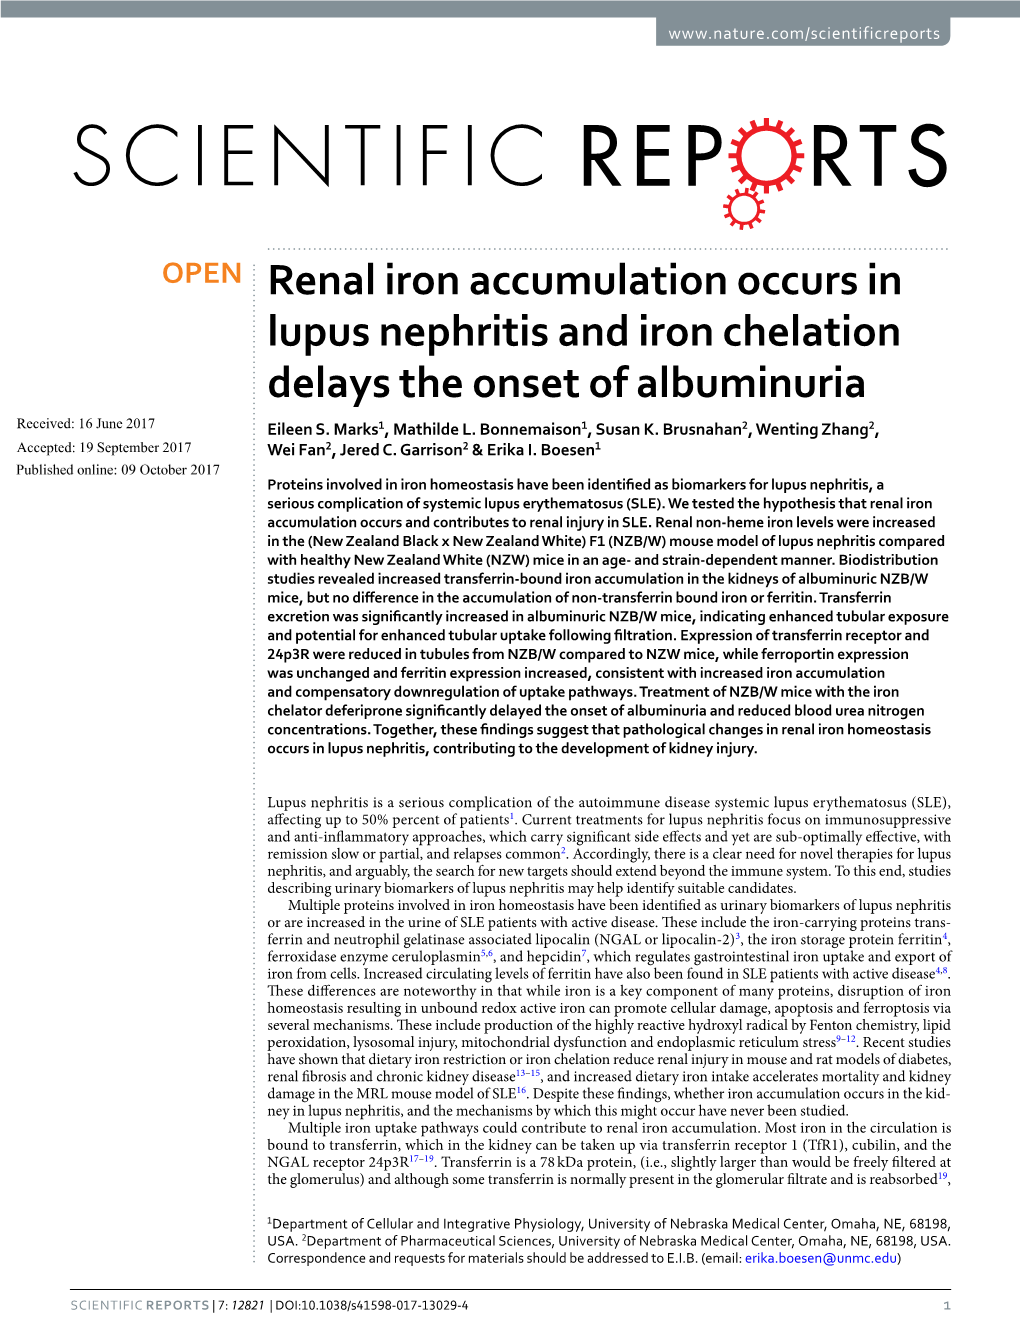 Renal Iron Accumulation Occurs in Lupus Nephritis and Iron Chelation Delays the Onset of Albuminuria Received: 16 June 2017 Eileen S